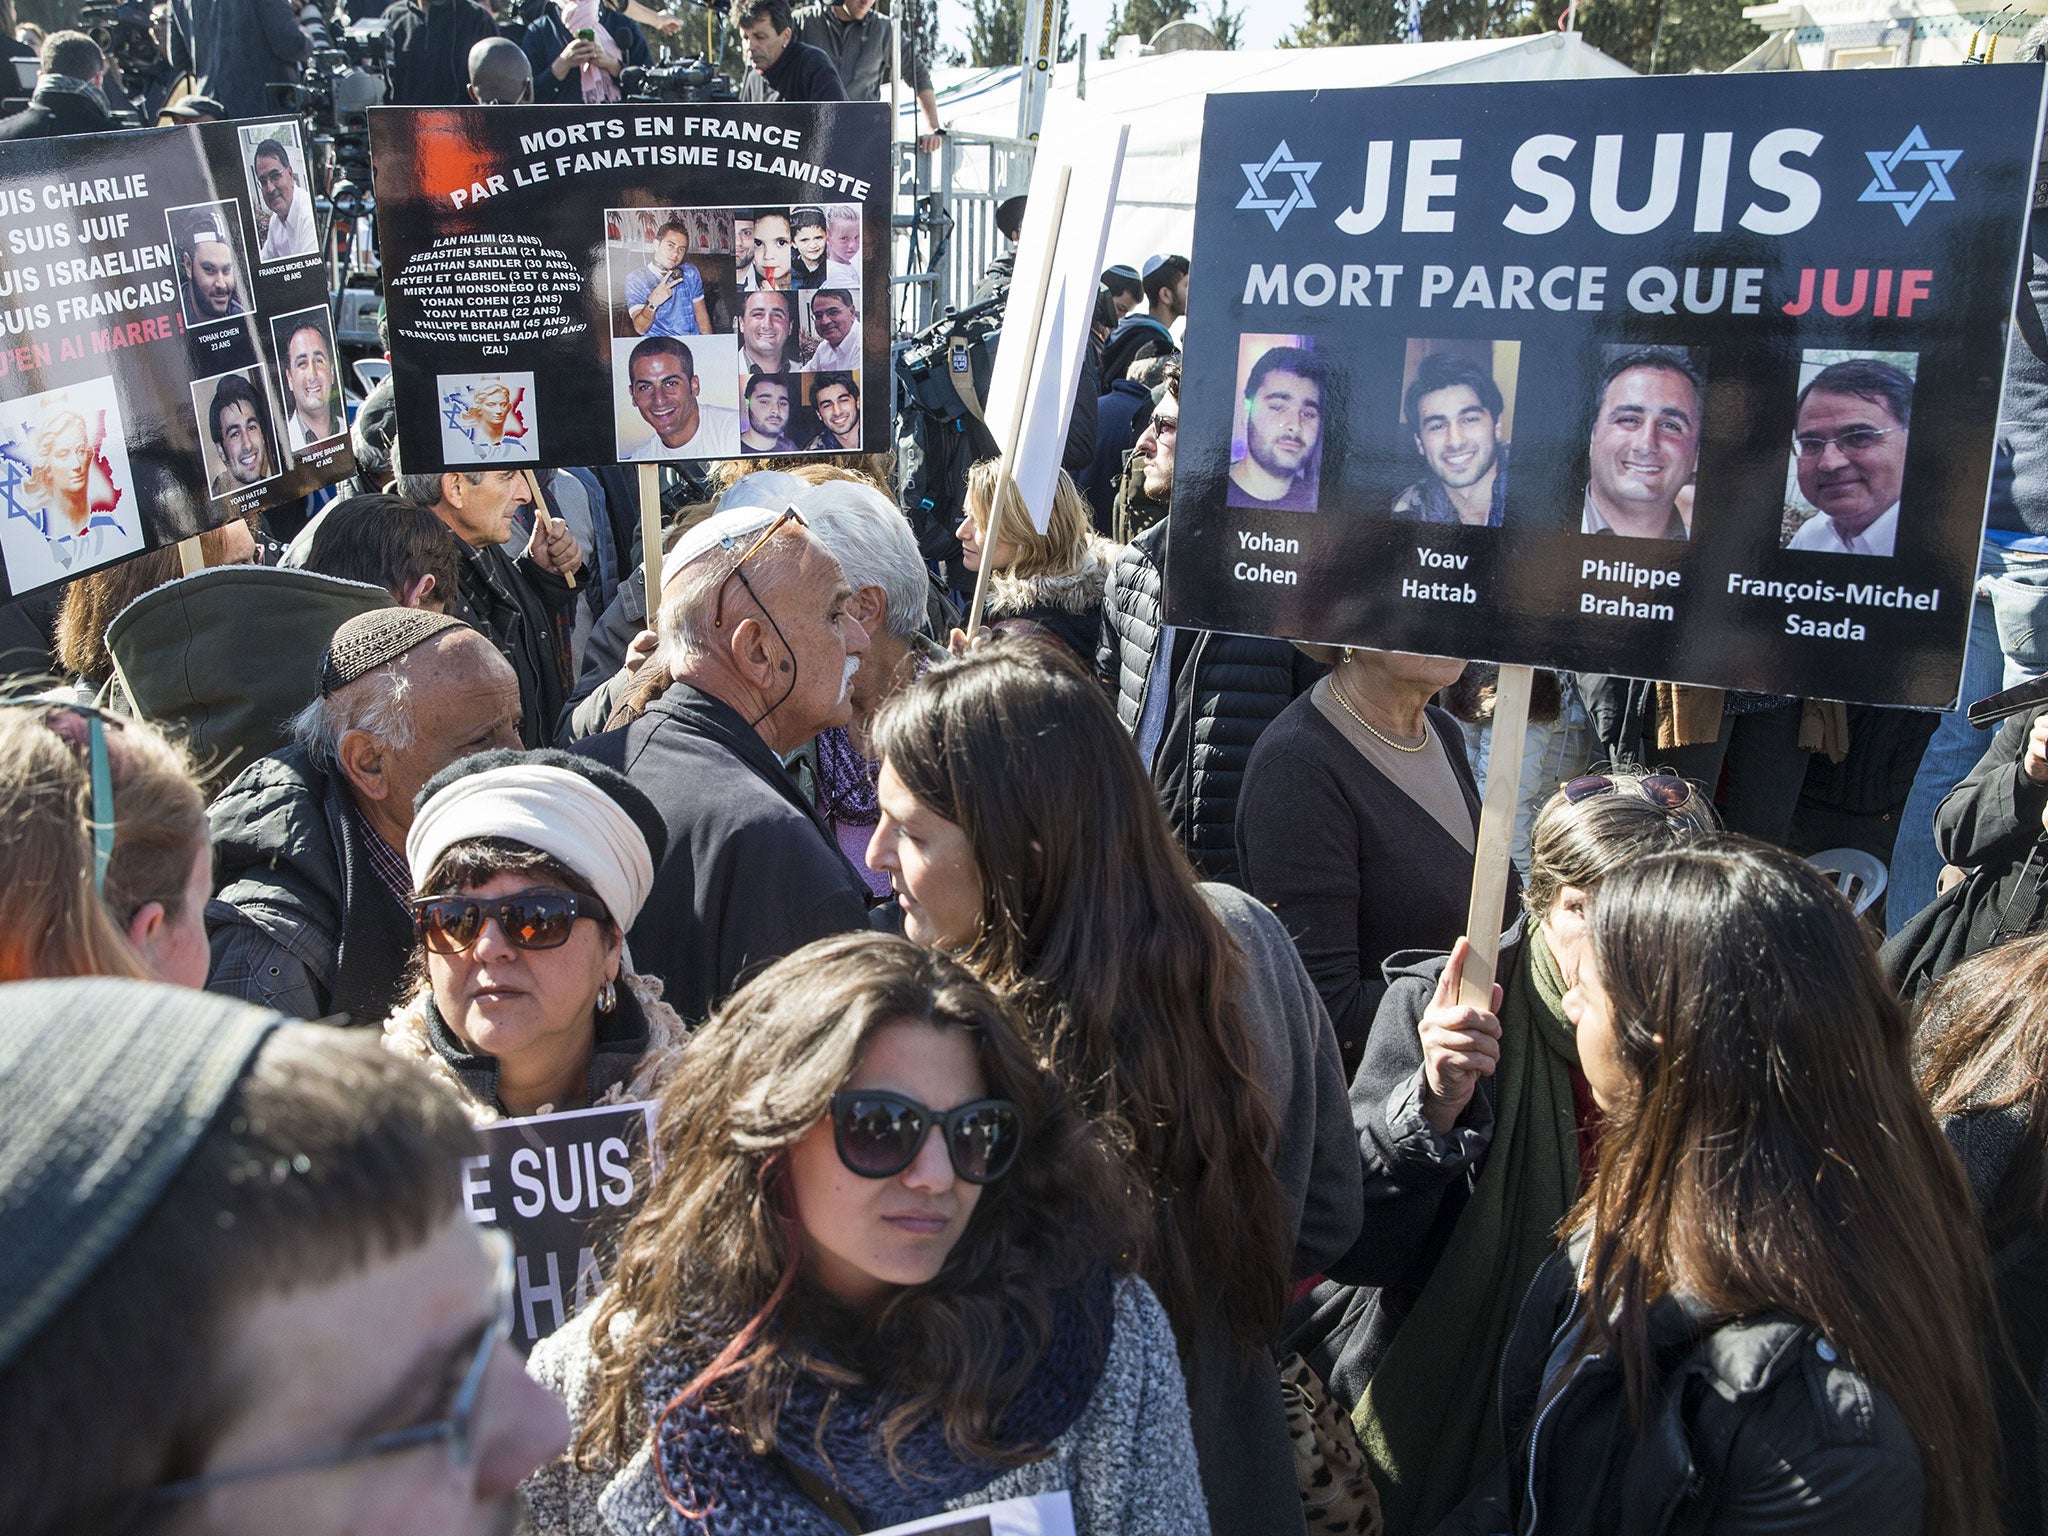 People protest at the murder of French Jews during the Paris attacks